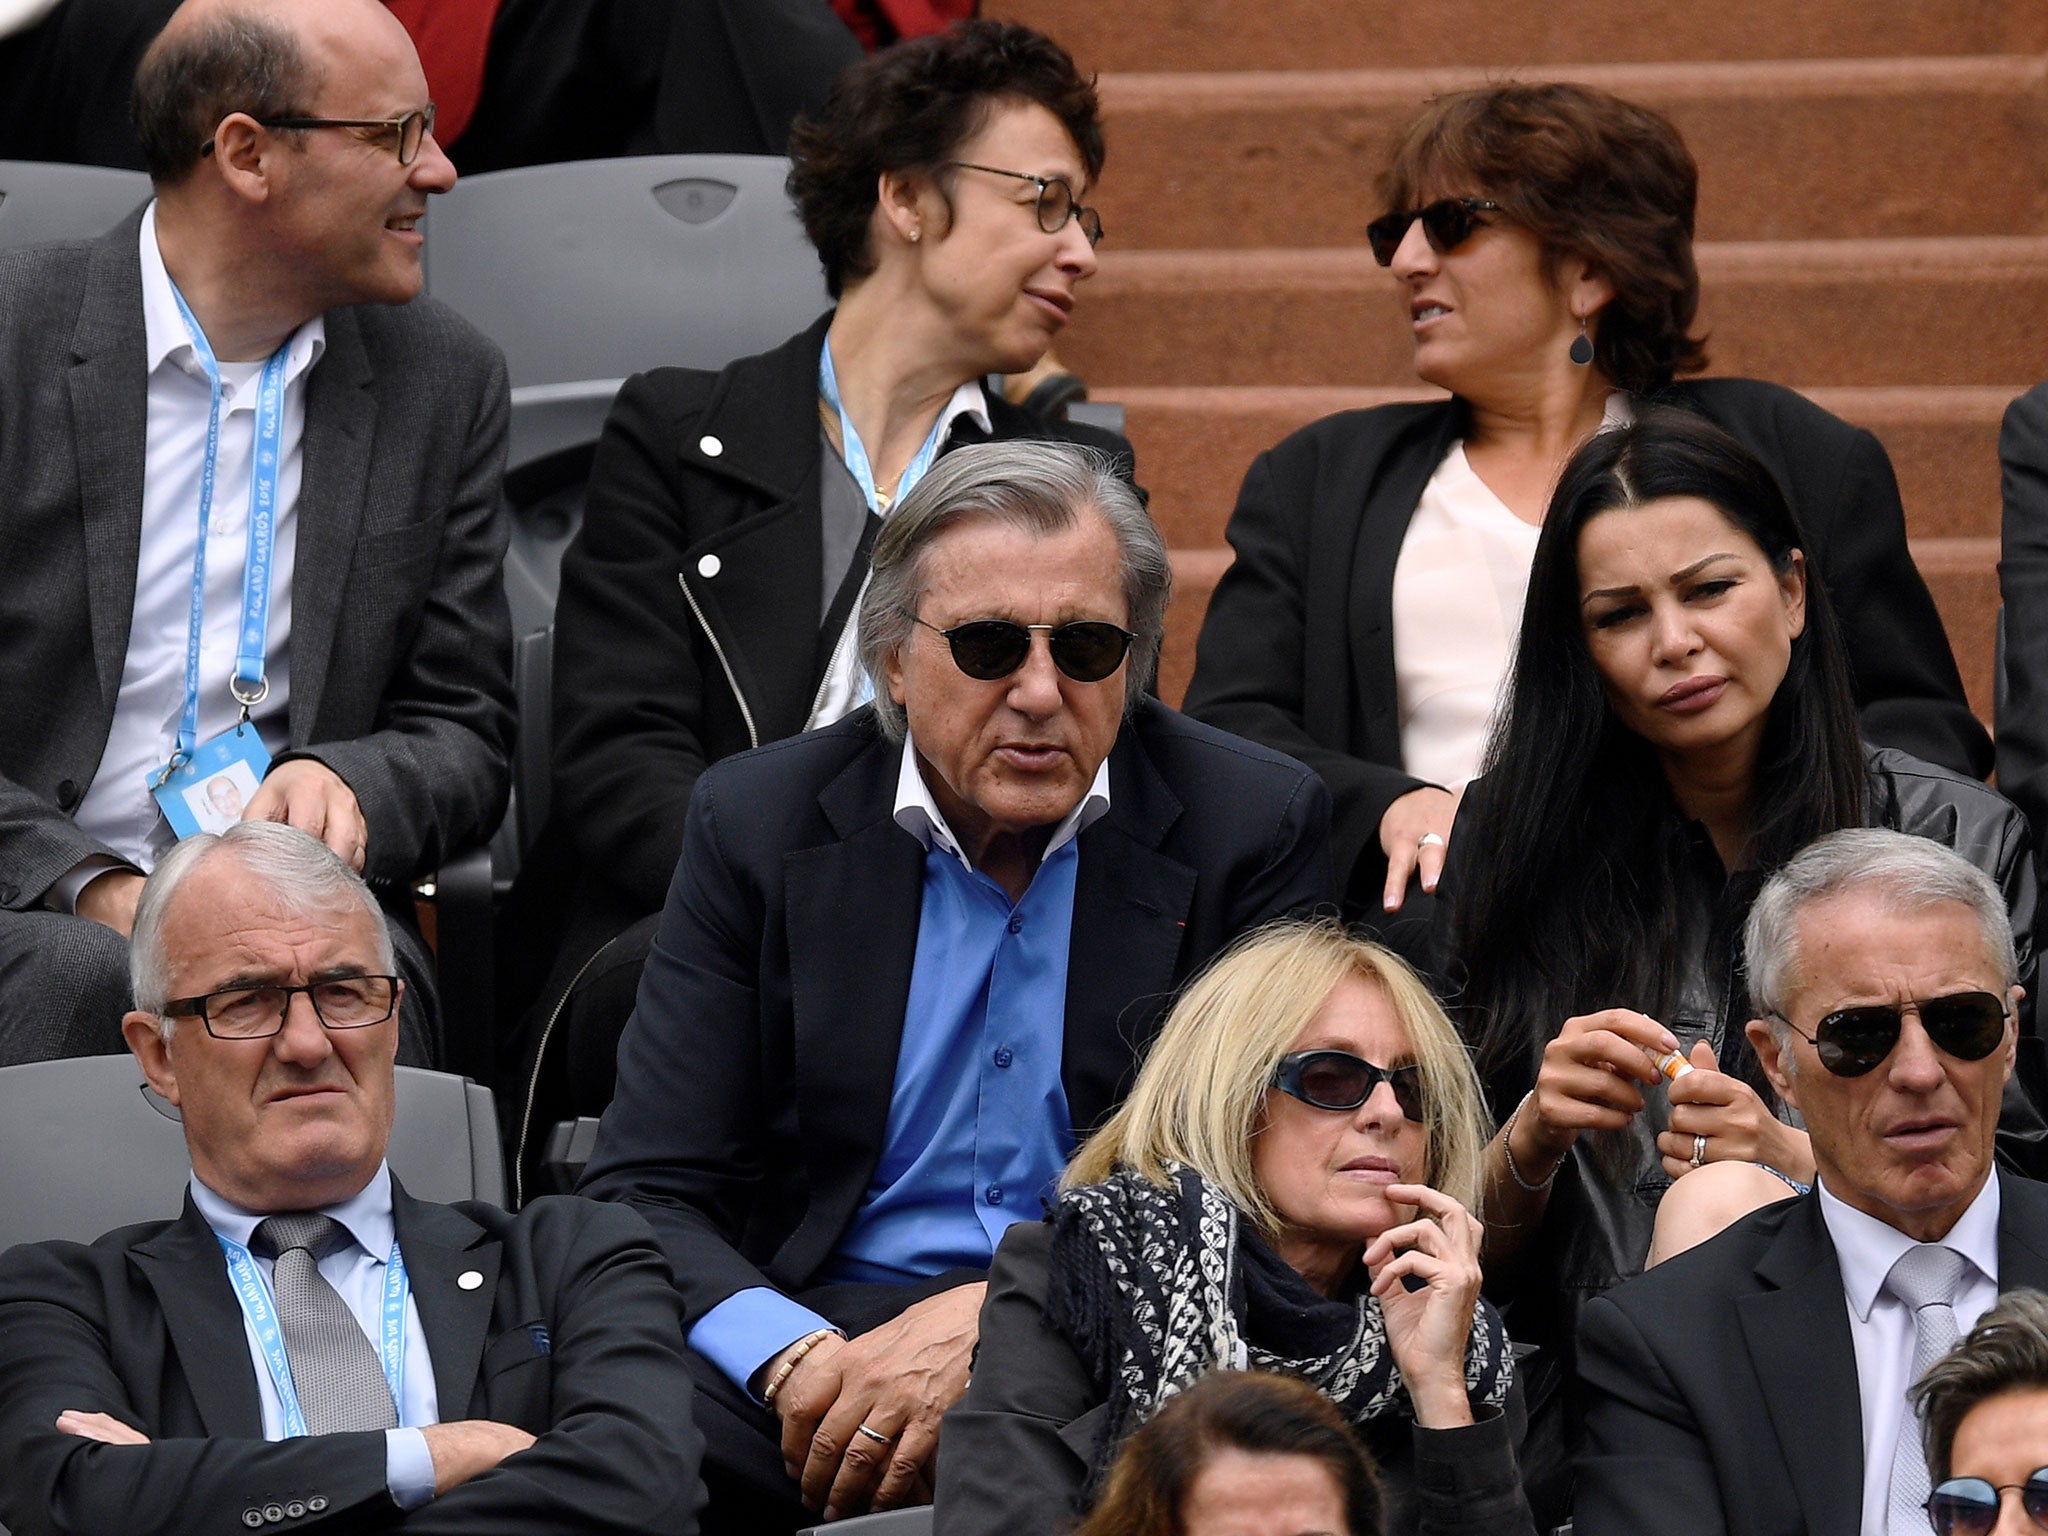 Nastase was dismissed from court for his behaviour